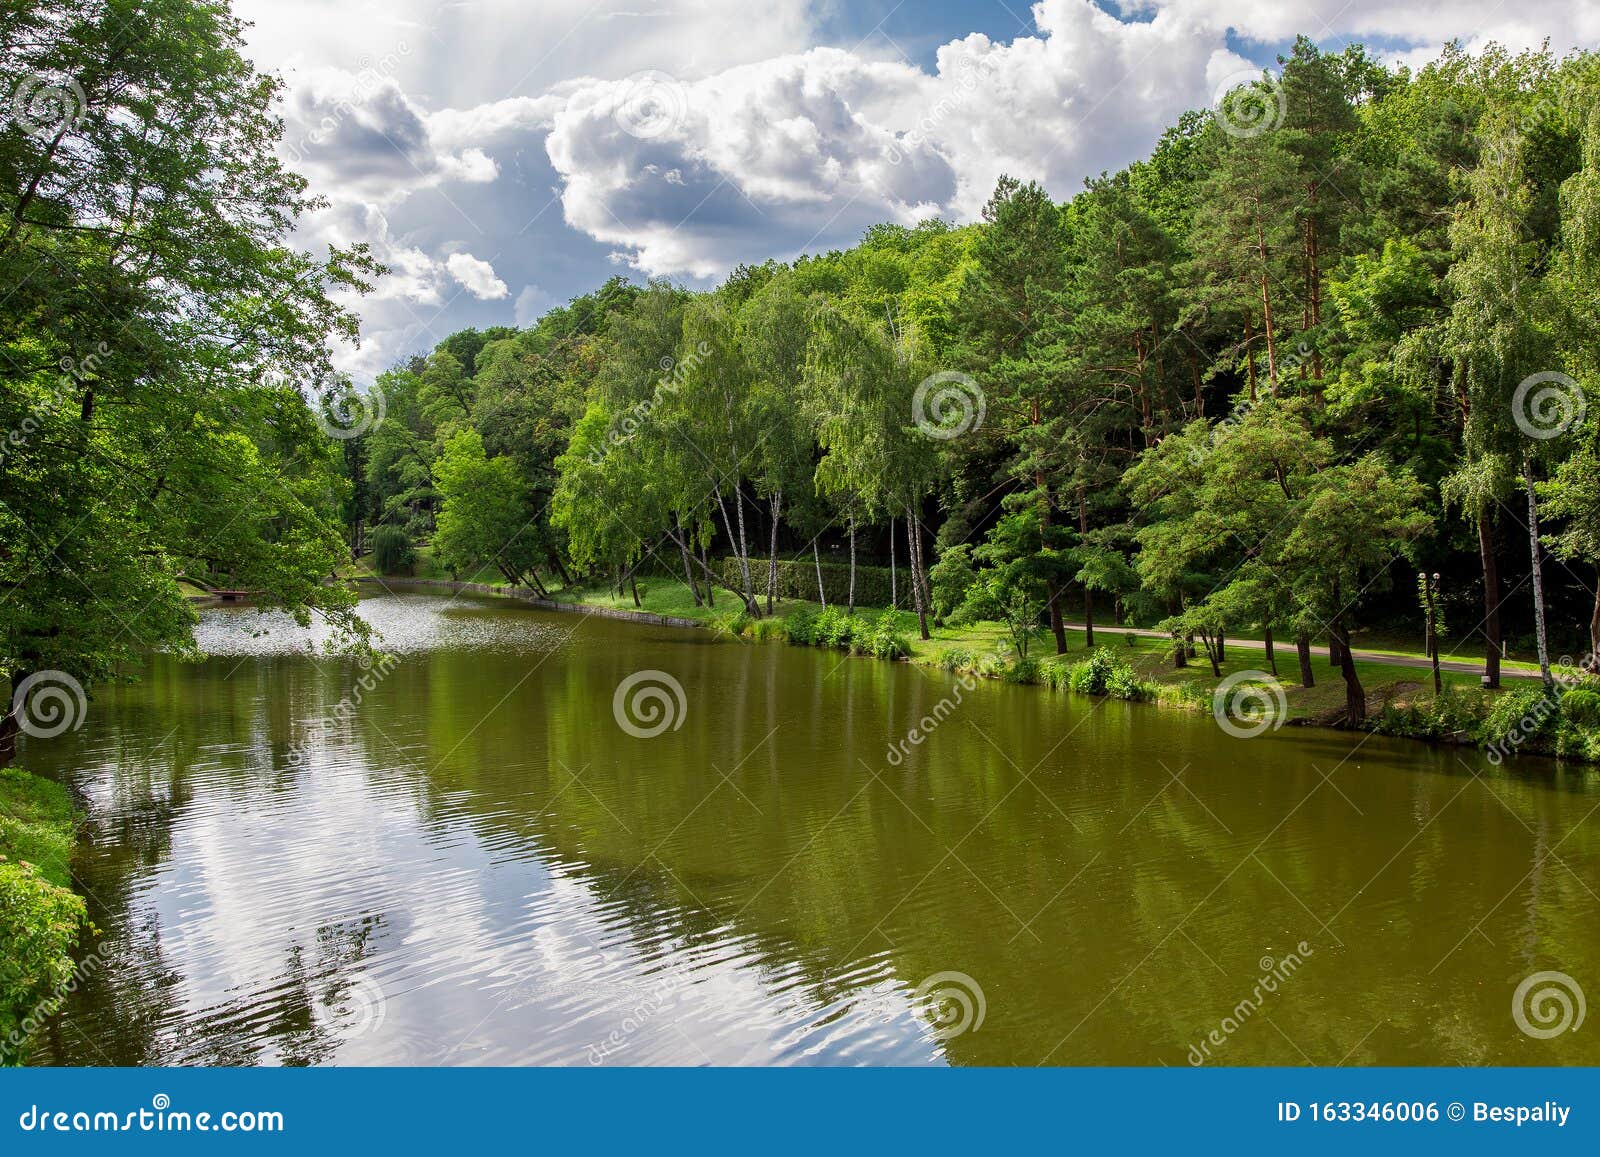 River With Water In A Forest With Green Trees On The Banks Of A Pond